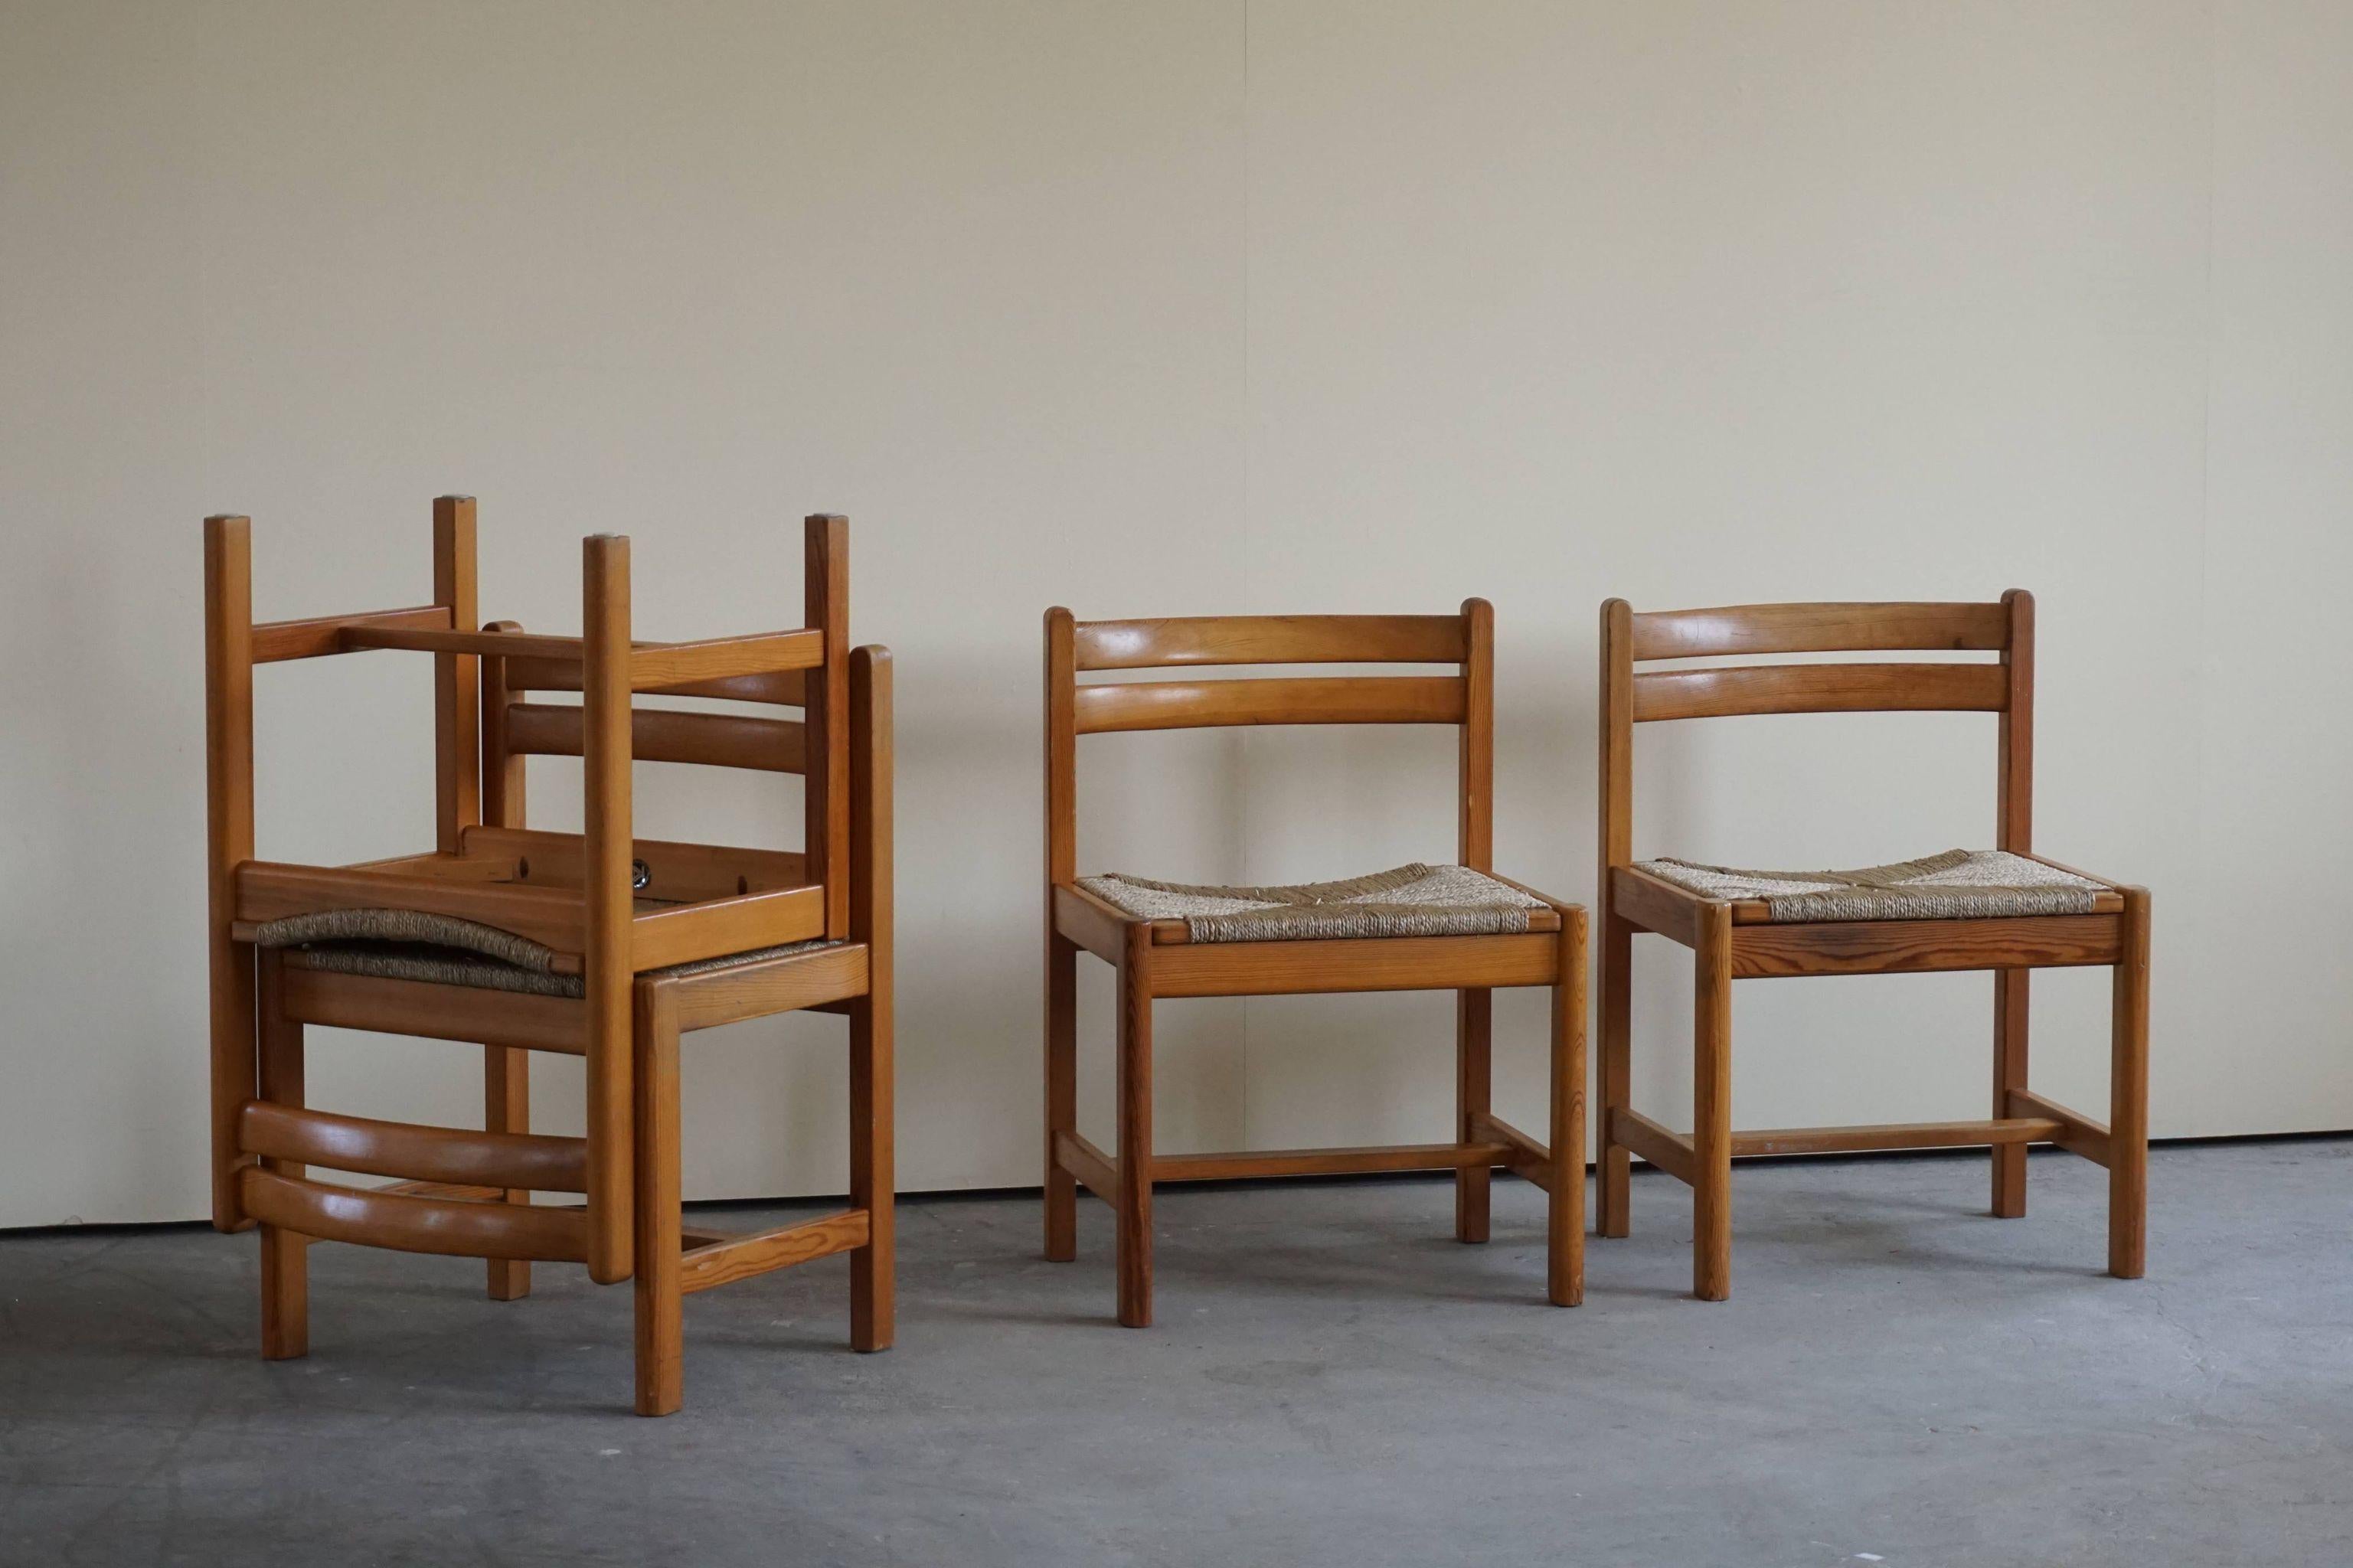 Set of 8 mid century Swedish dining chairs in solid oregon pine and new papercord on all chairs, model 